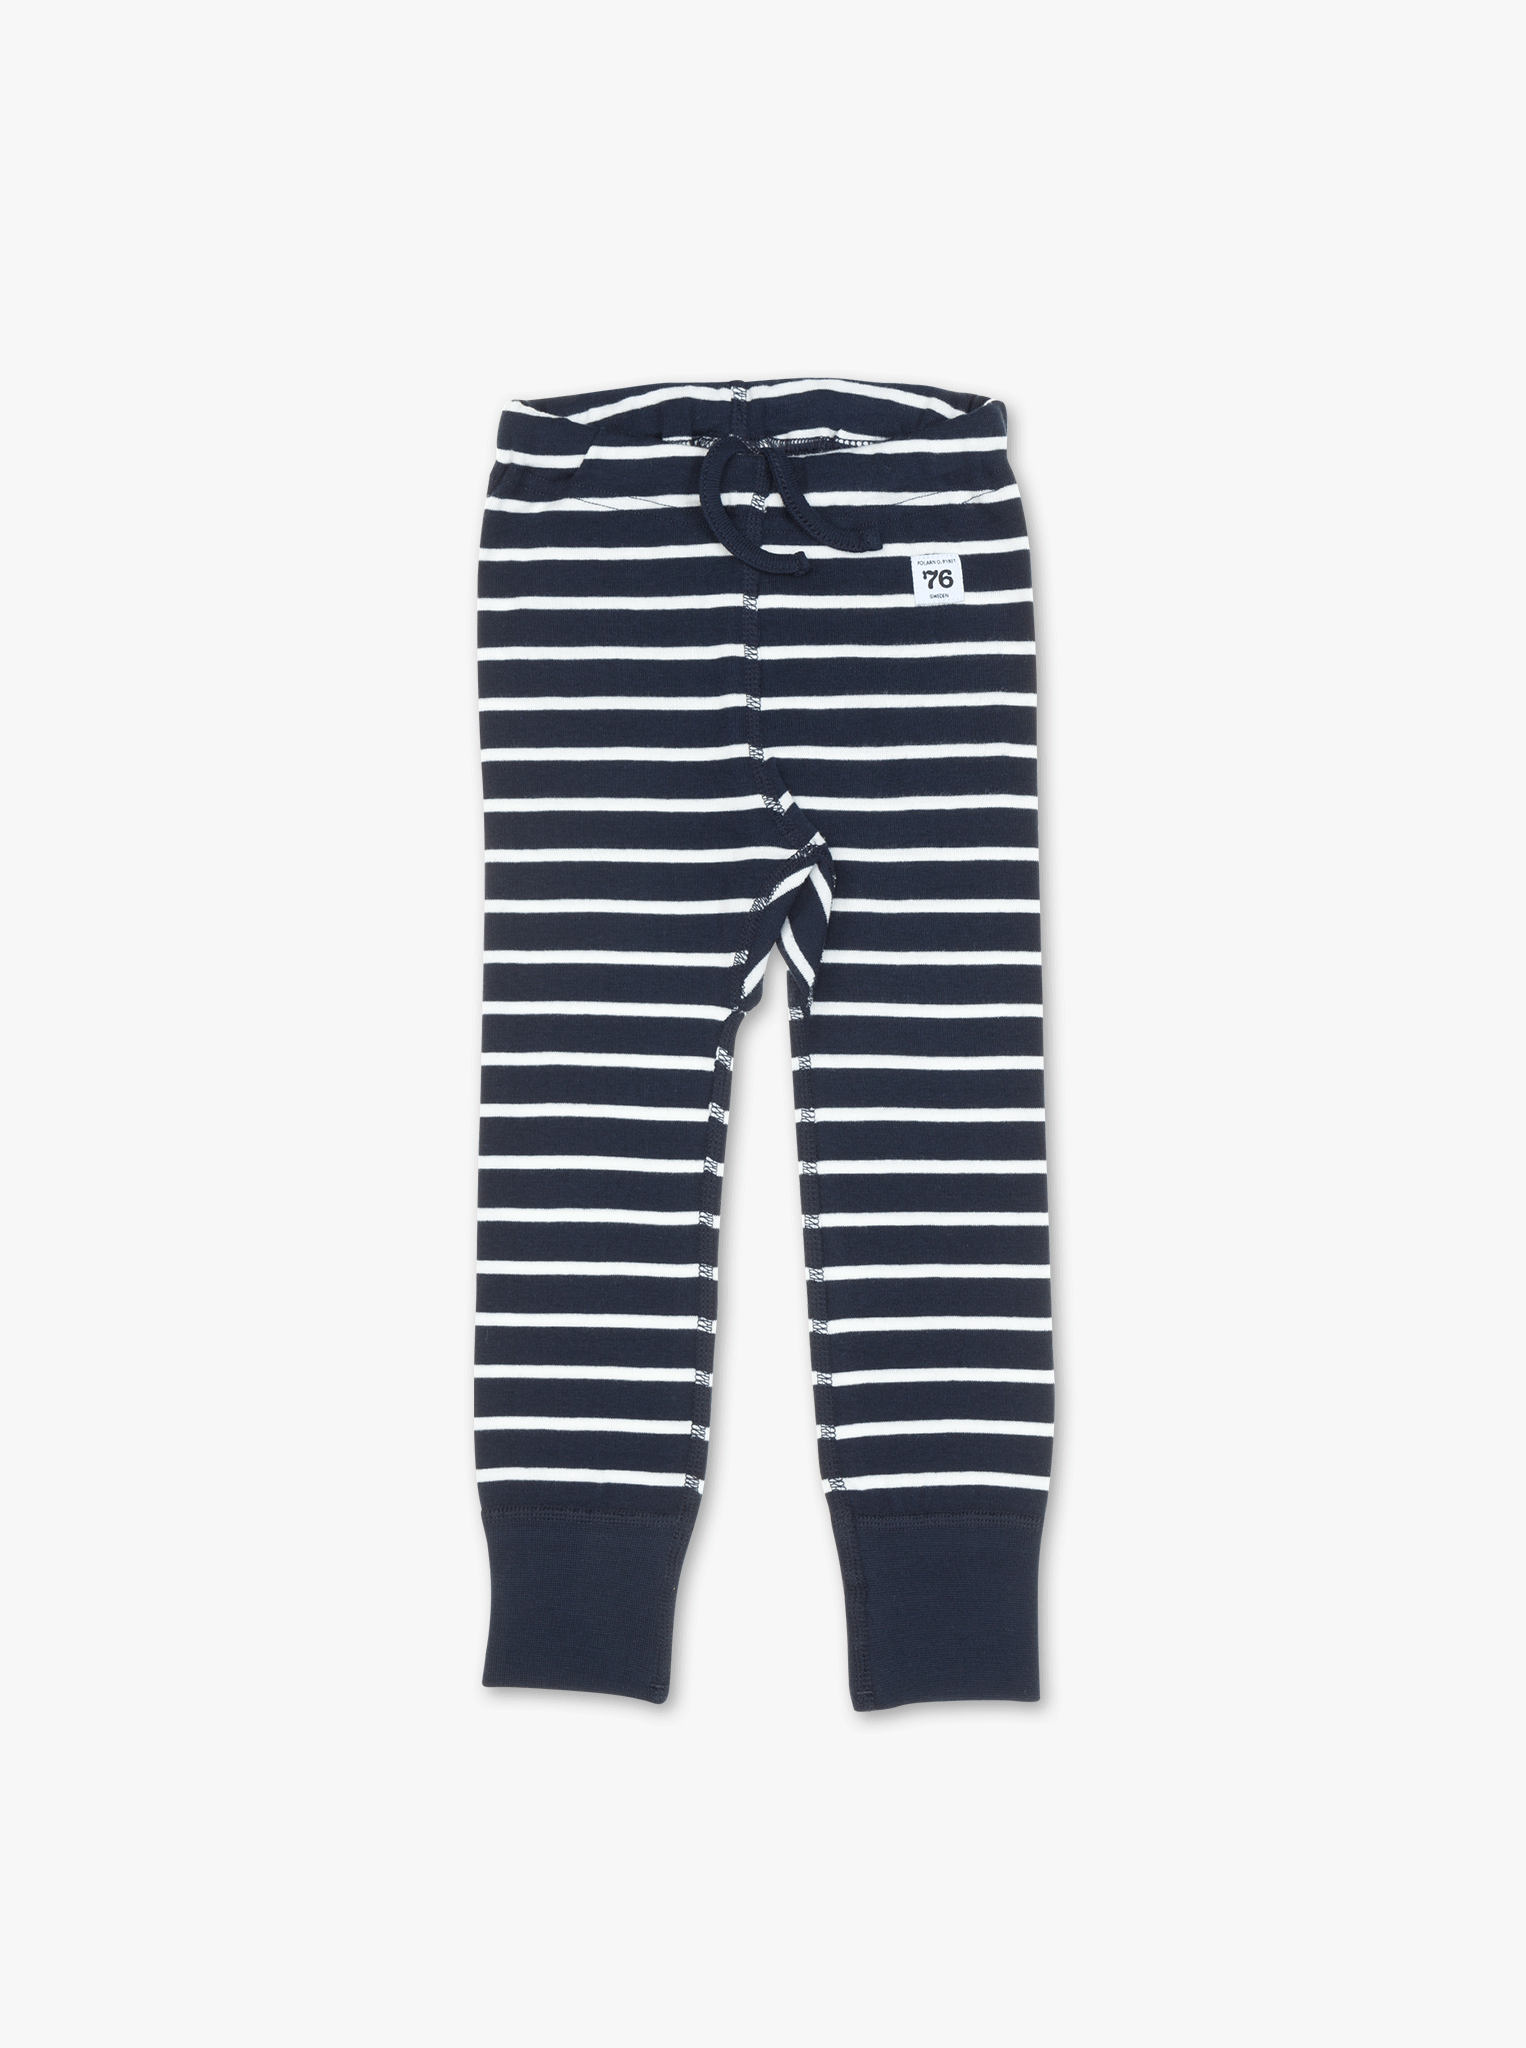 navy blue and white stripes baby leggings, ethical organic cotton, long lasting polarn o. pyret quality